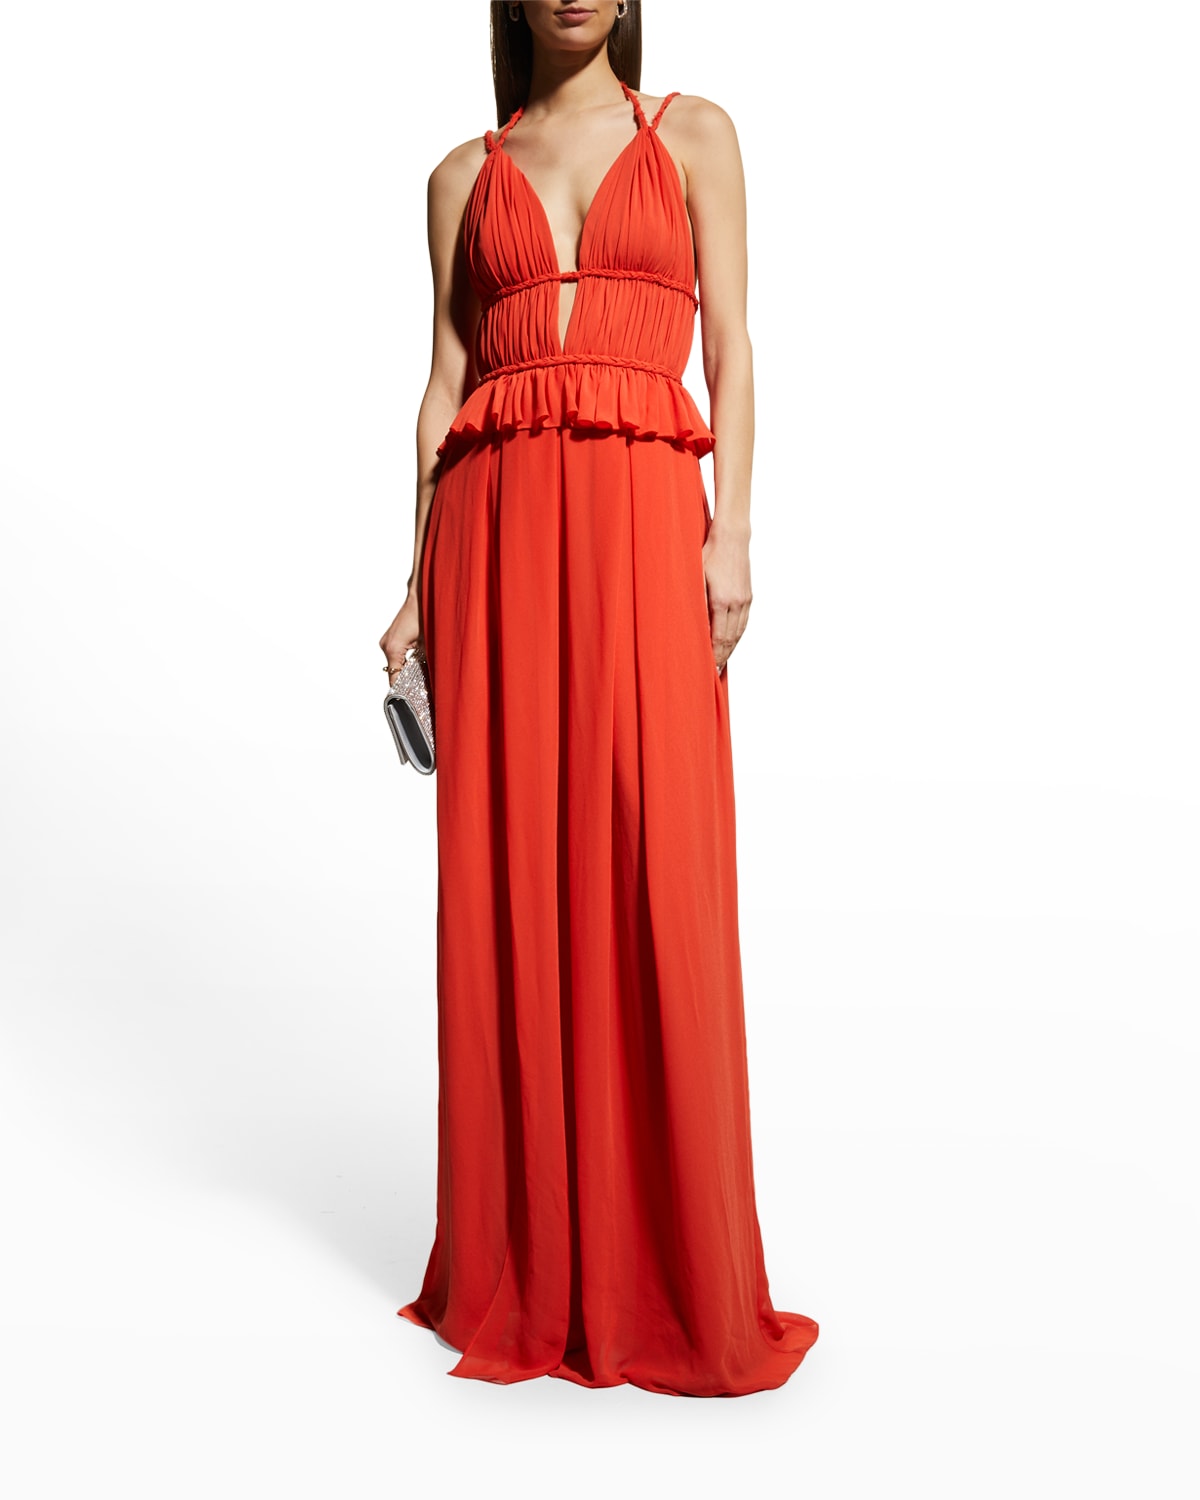 DRESS THE POPULATION ATHENA PLEATED PEPLUM CUTOUT GOWN